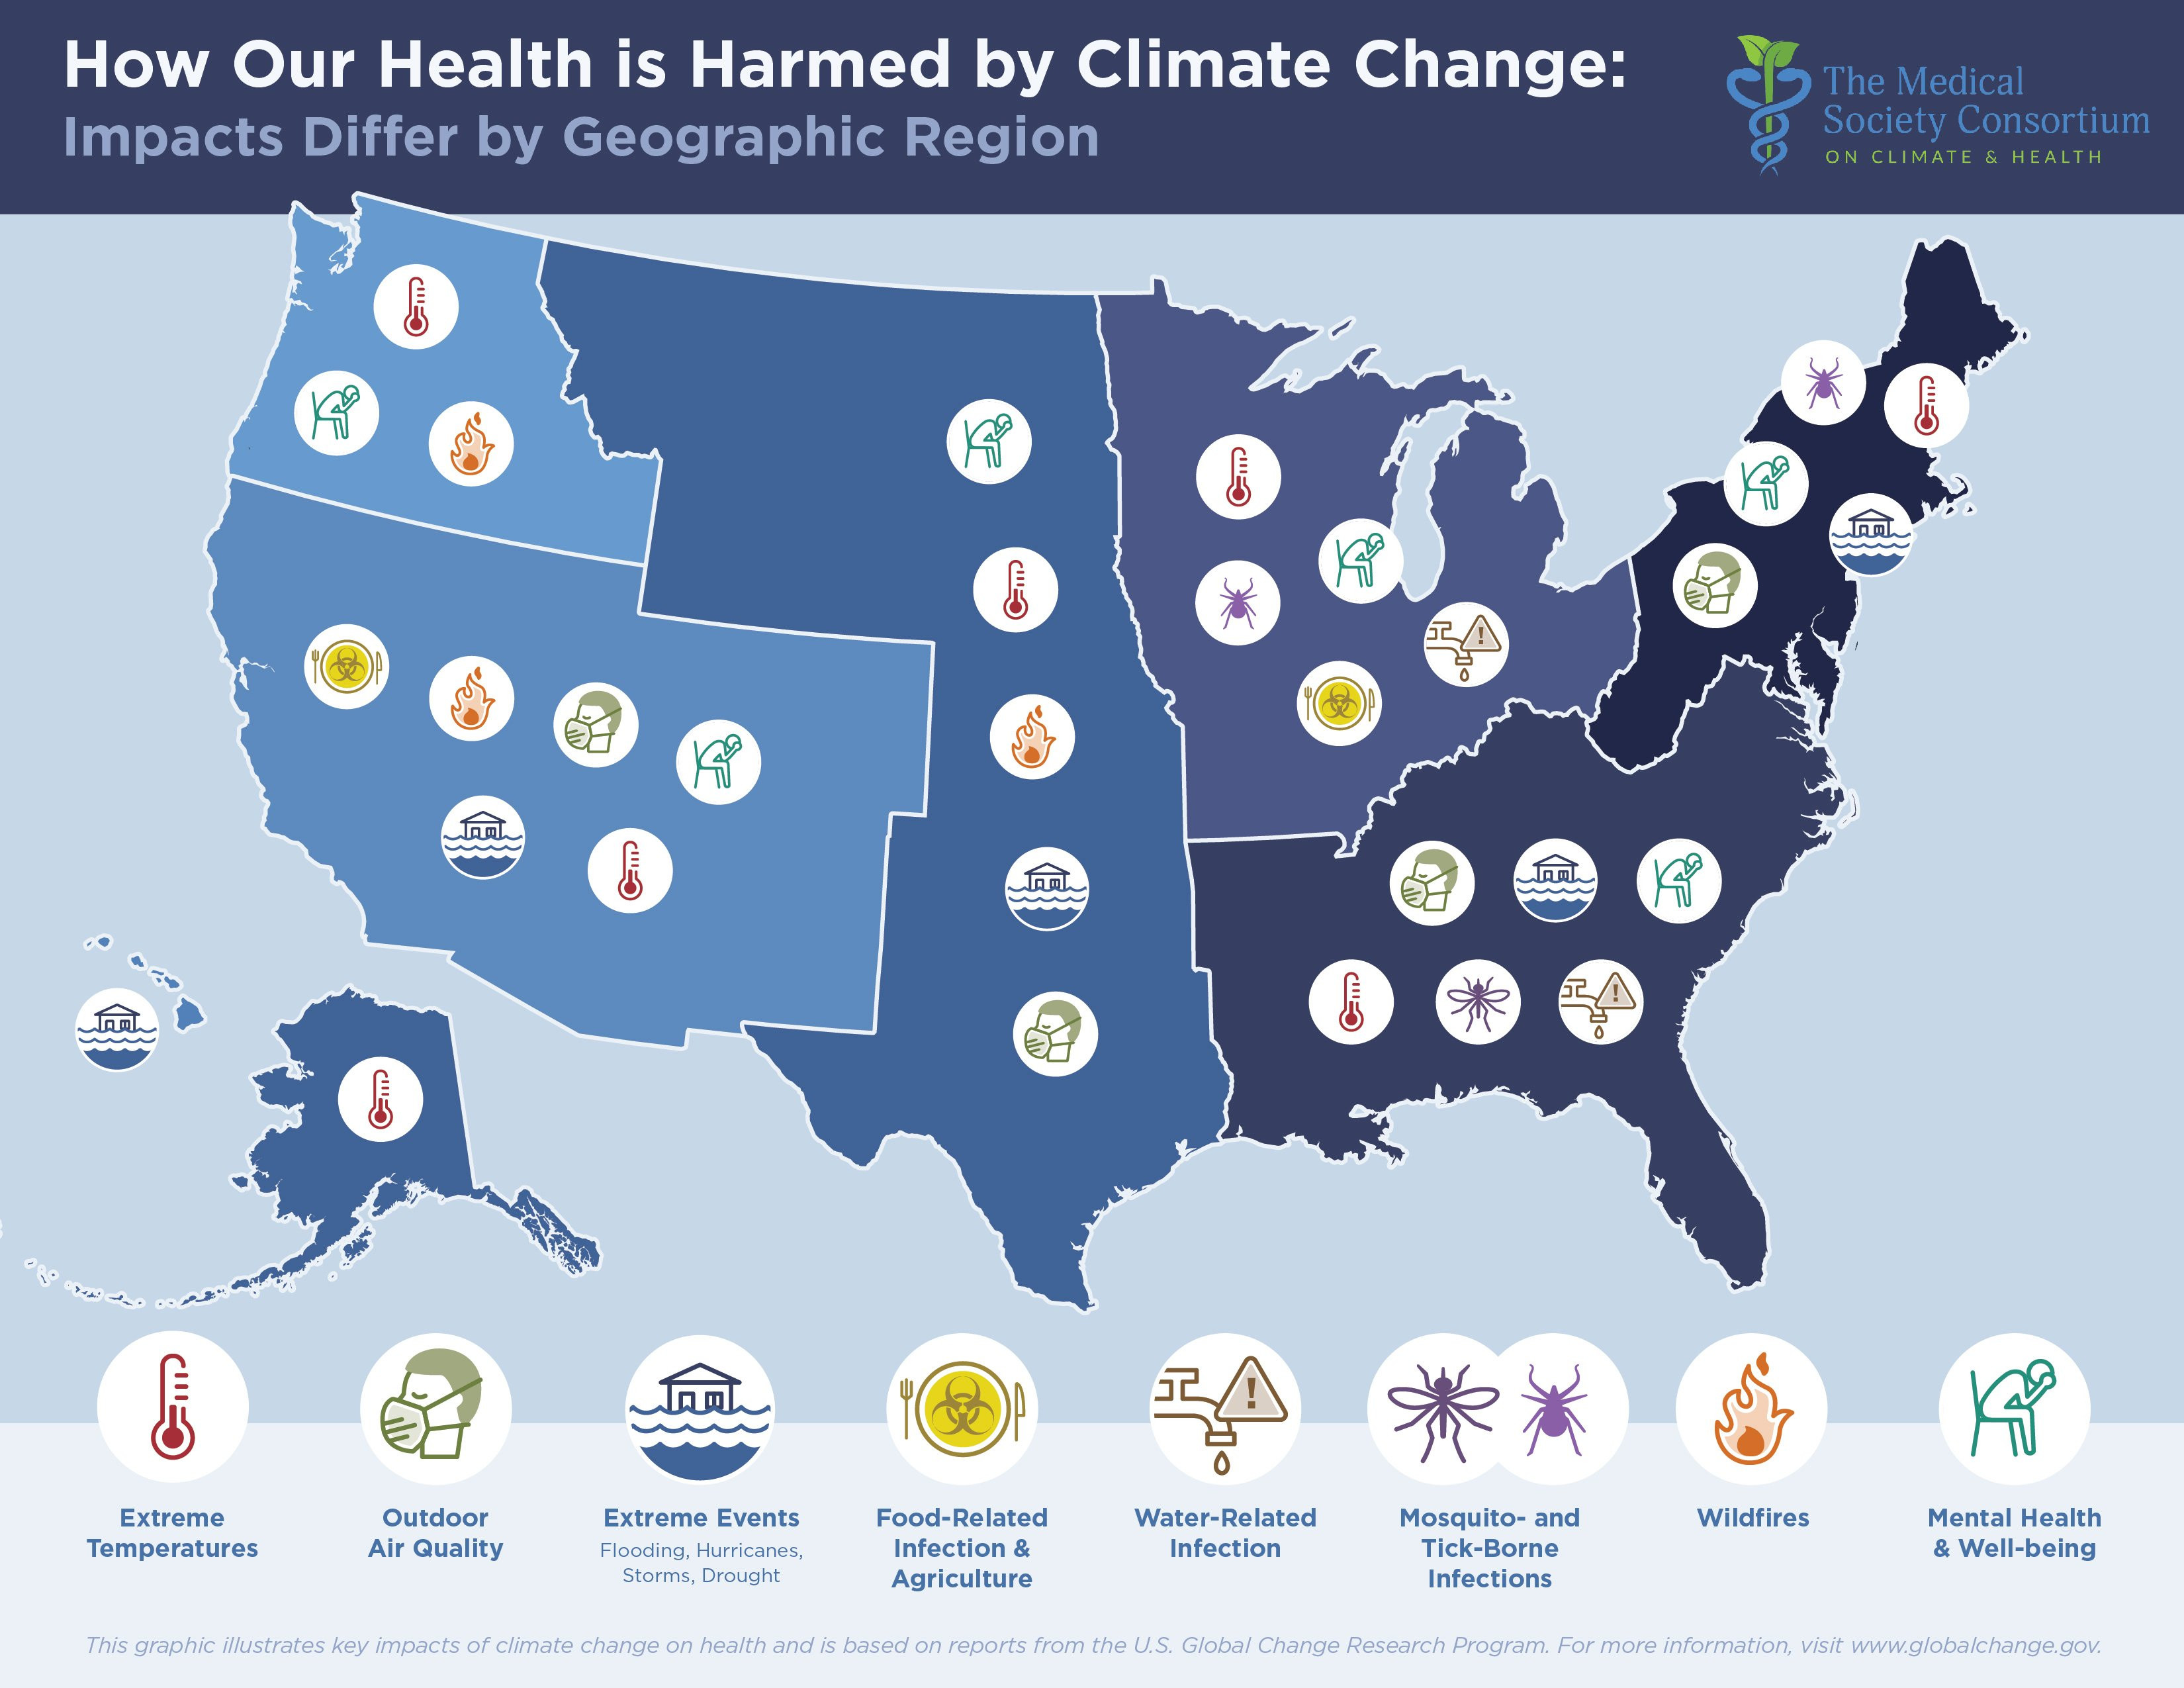 Map of climate change impacts on health by region in the U.S.